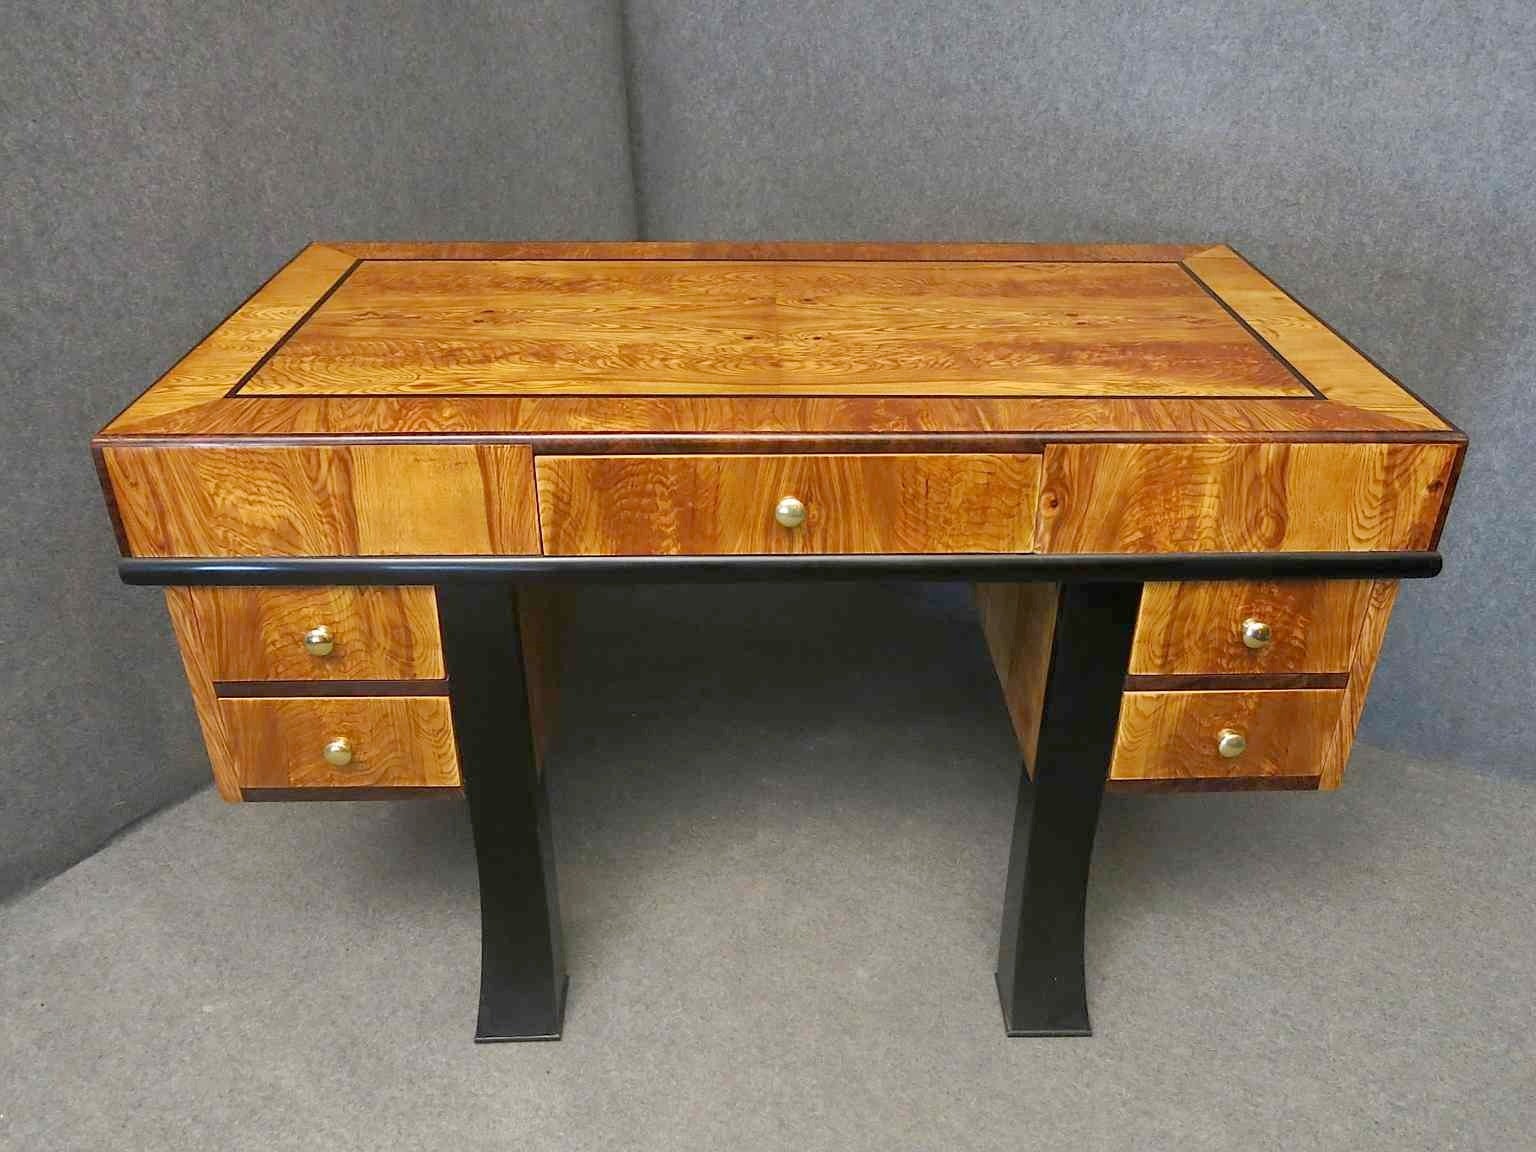 Italian Art Deco desk, all veneered in ashwood inlaid with ebony. Centre desk since it is also veneered in the back part. All around a black frame runs along the bottom edge. Particular its 4 large black legs. There are five drawers, two on the